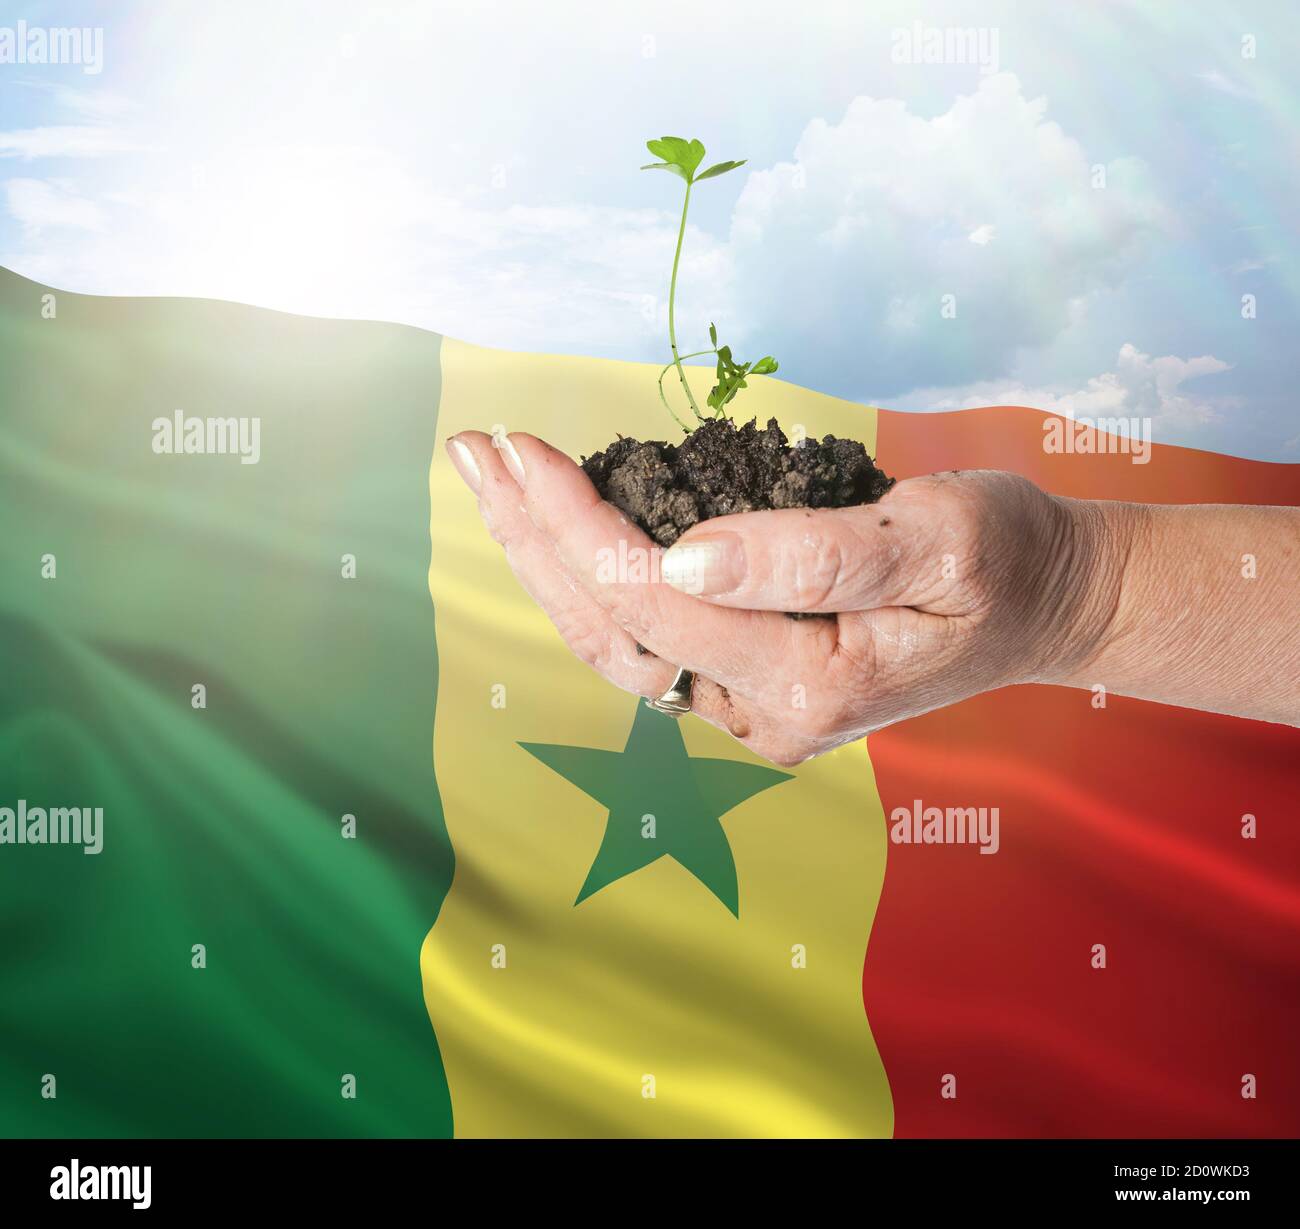 Senegal growth and new beginning. Green renewable energy and ecology concept. Hand holding young plant. Stock Photo